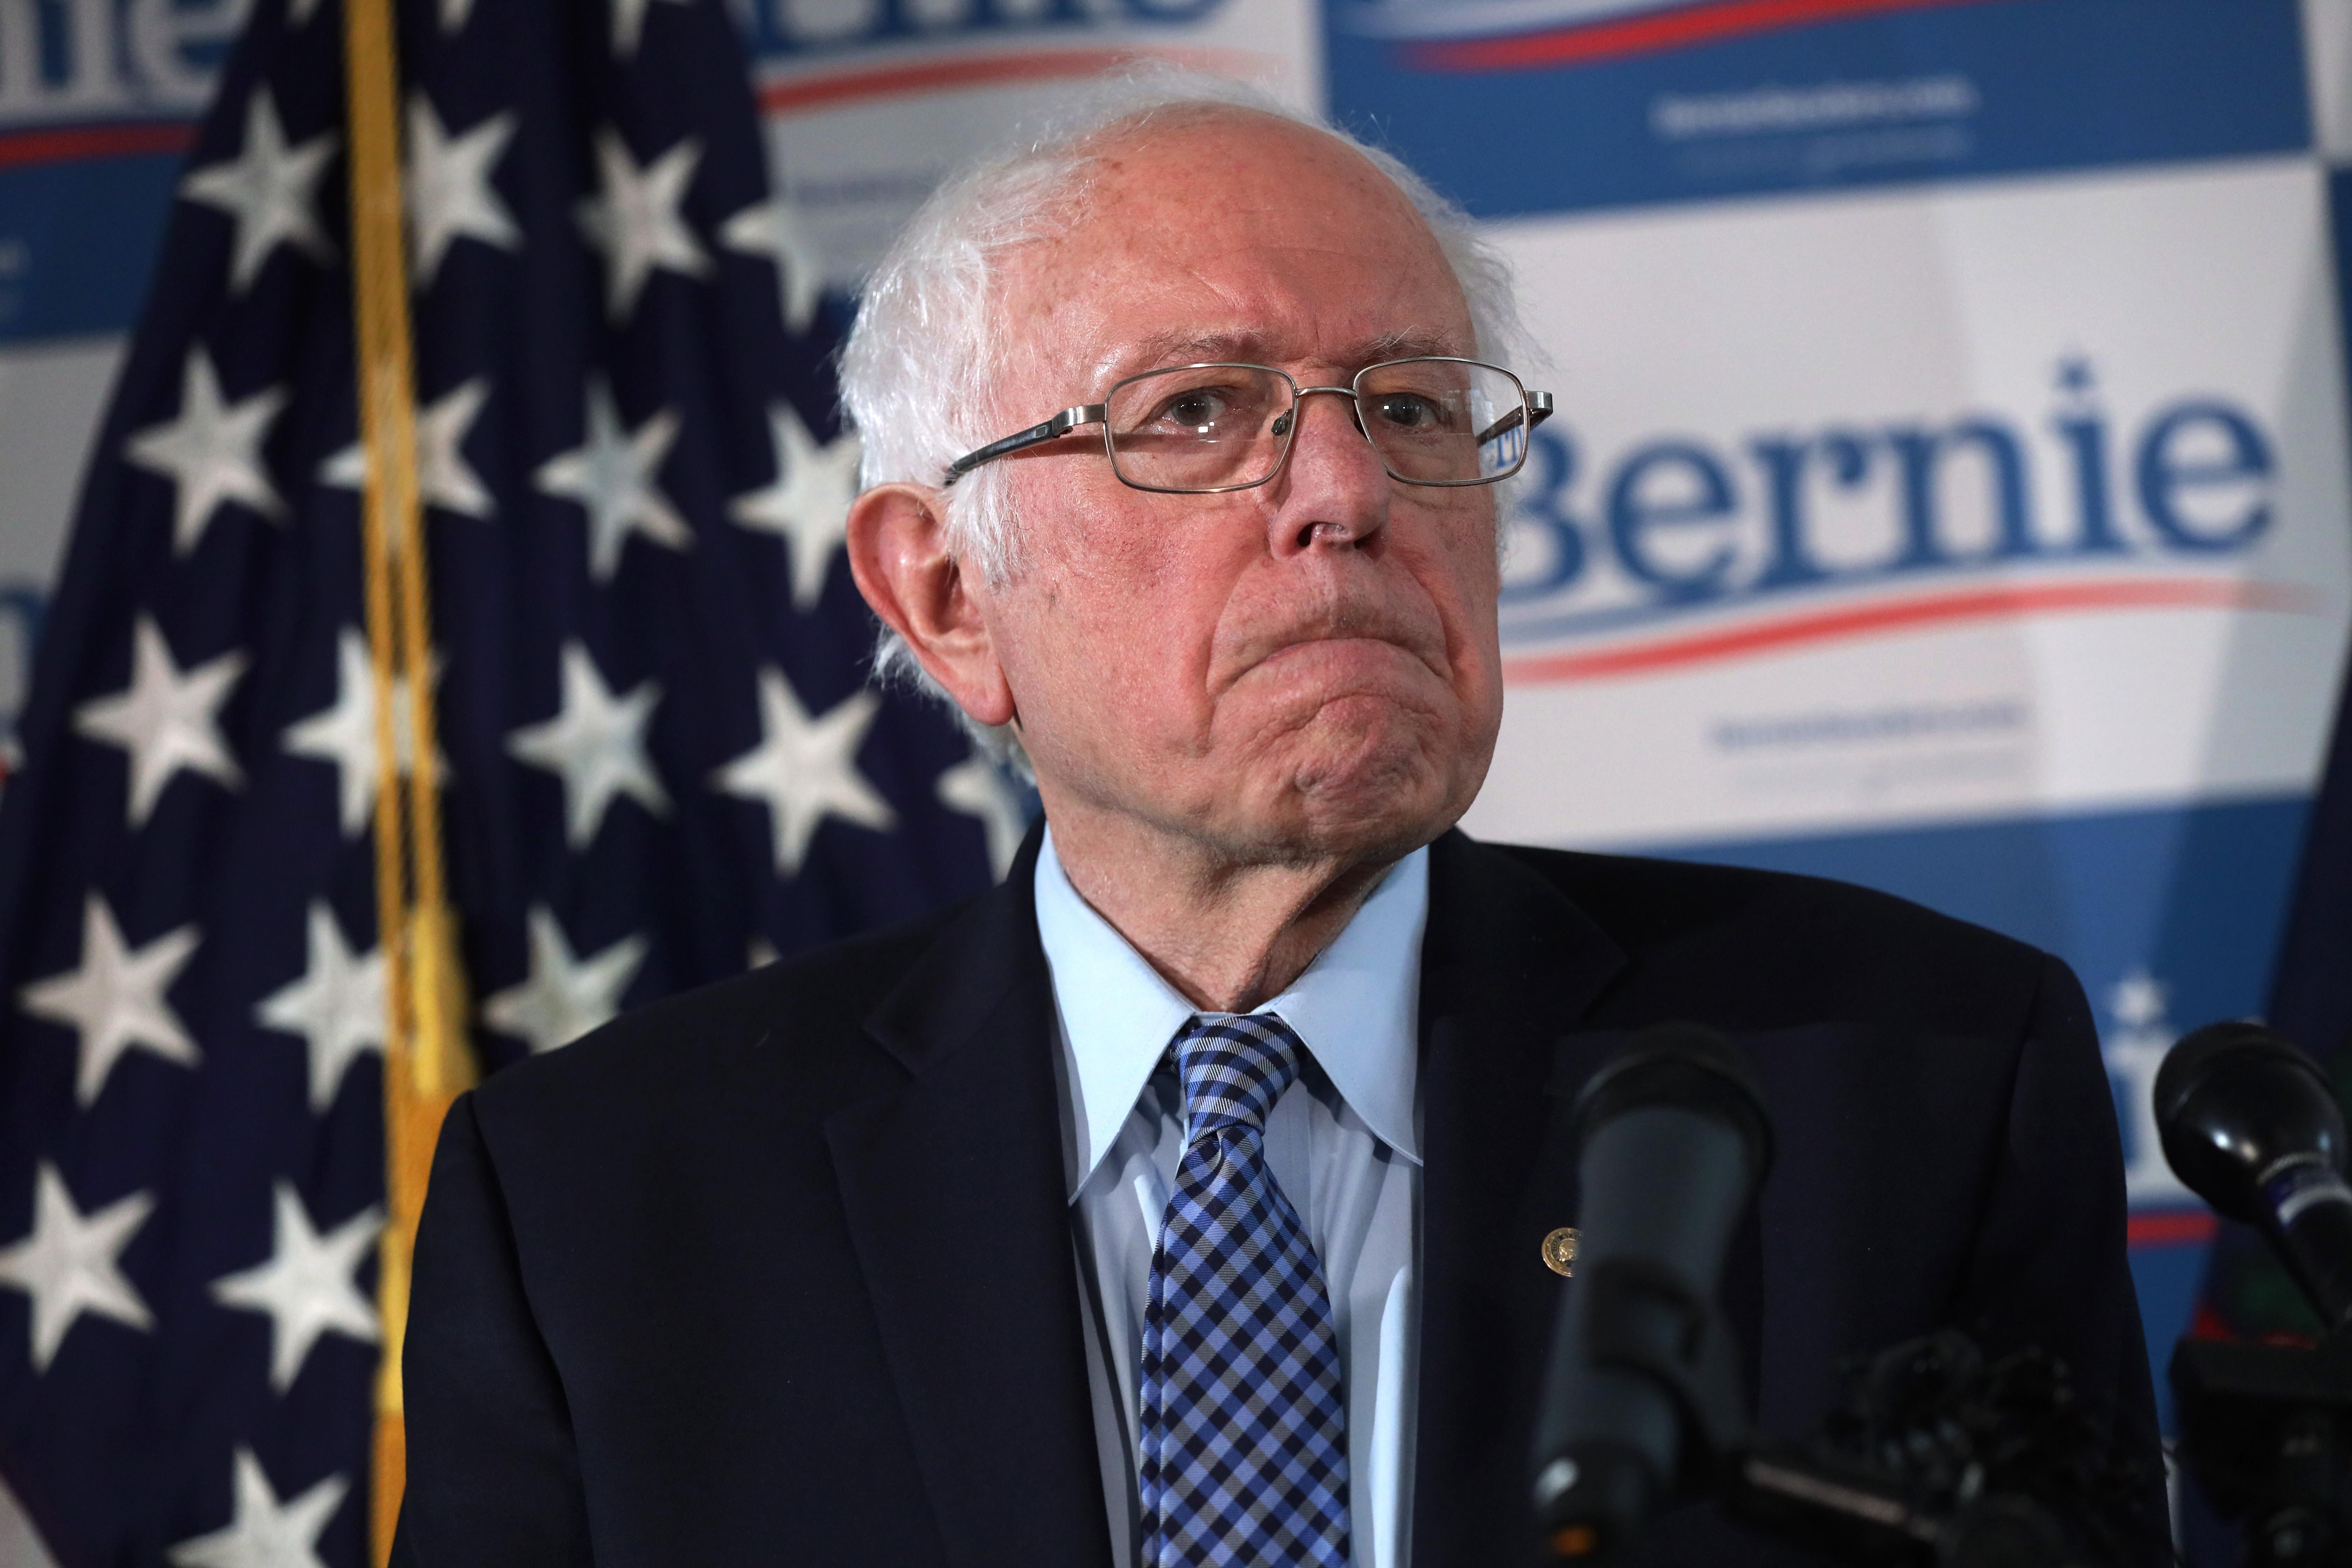 Bernie Sanders frowning in front of a mic